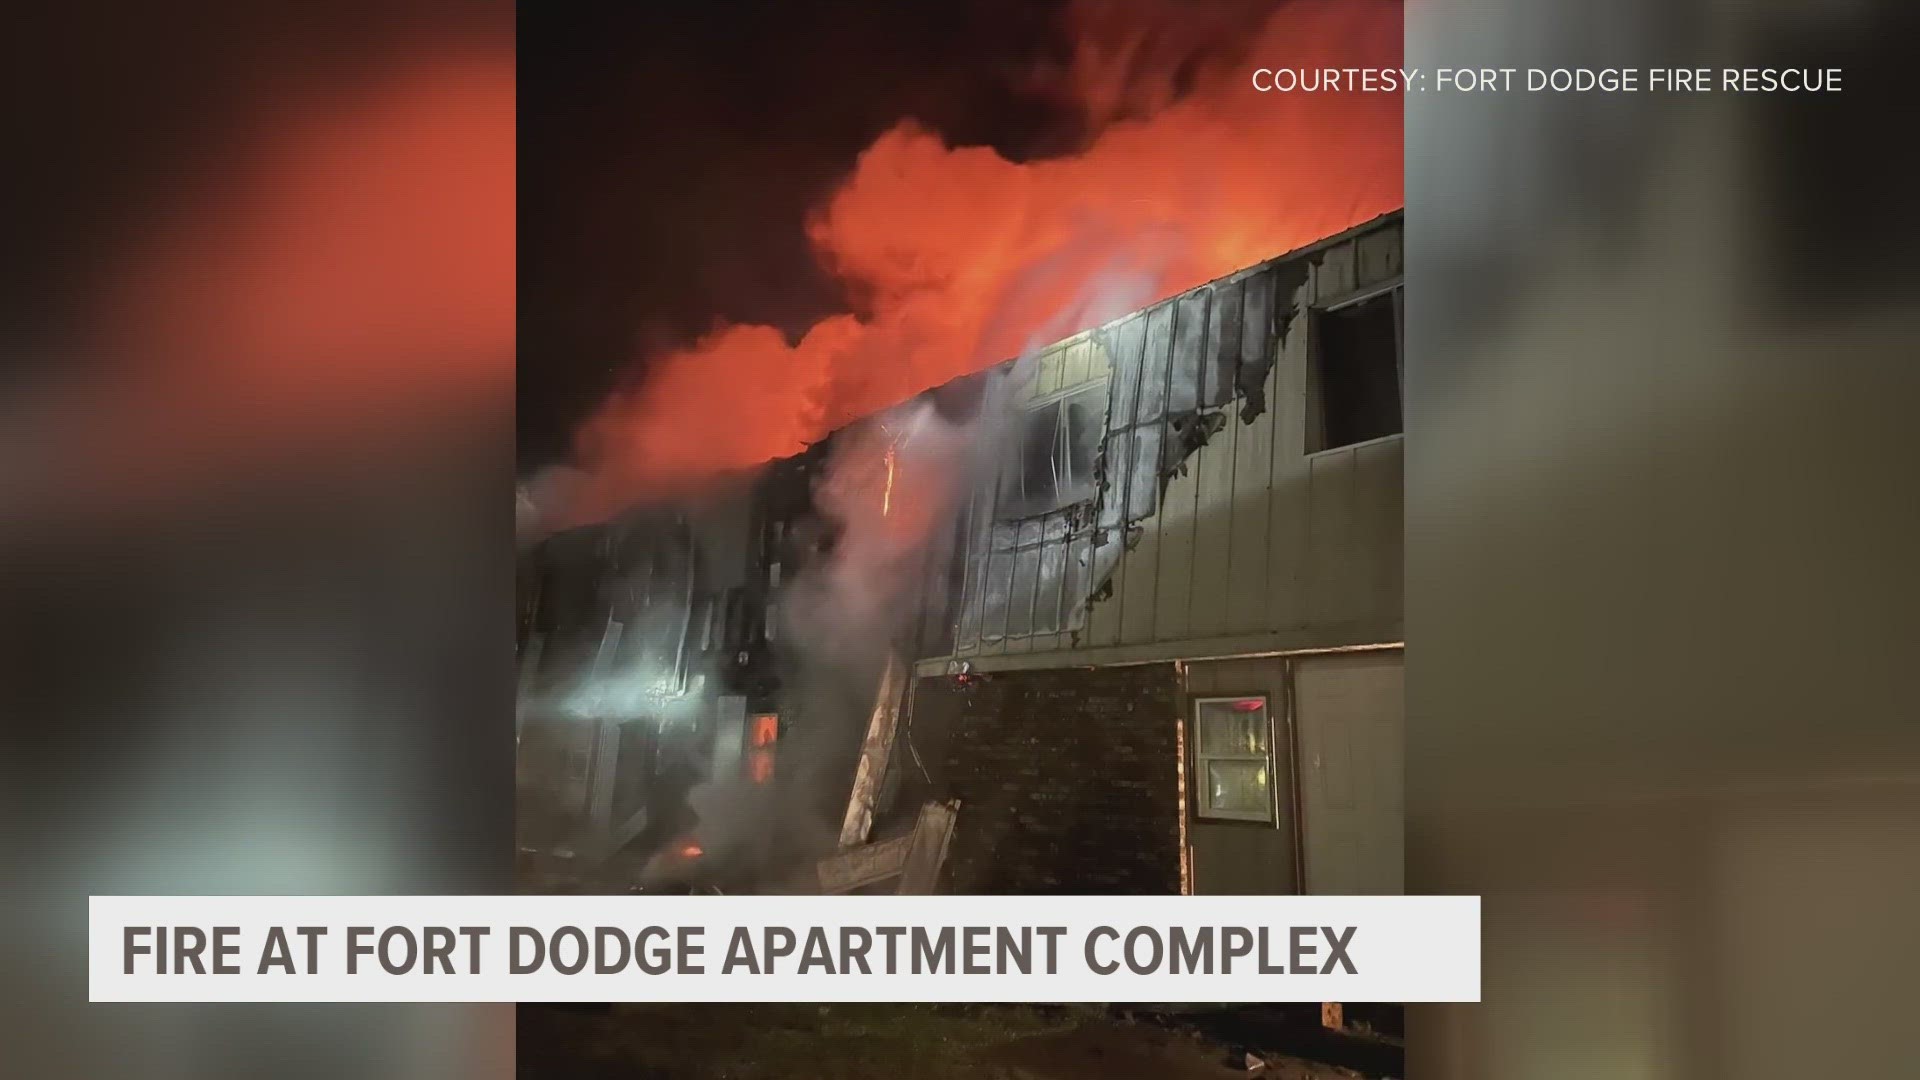 Fire crews were dispatched to the fire at Westridge Townhomes around 1:20 a.m. Sunday.